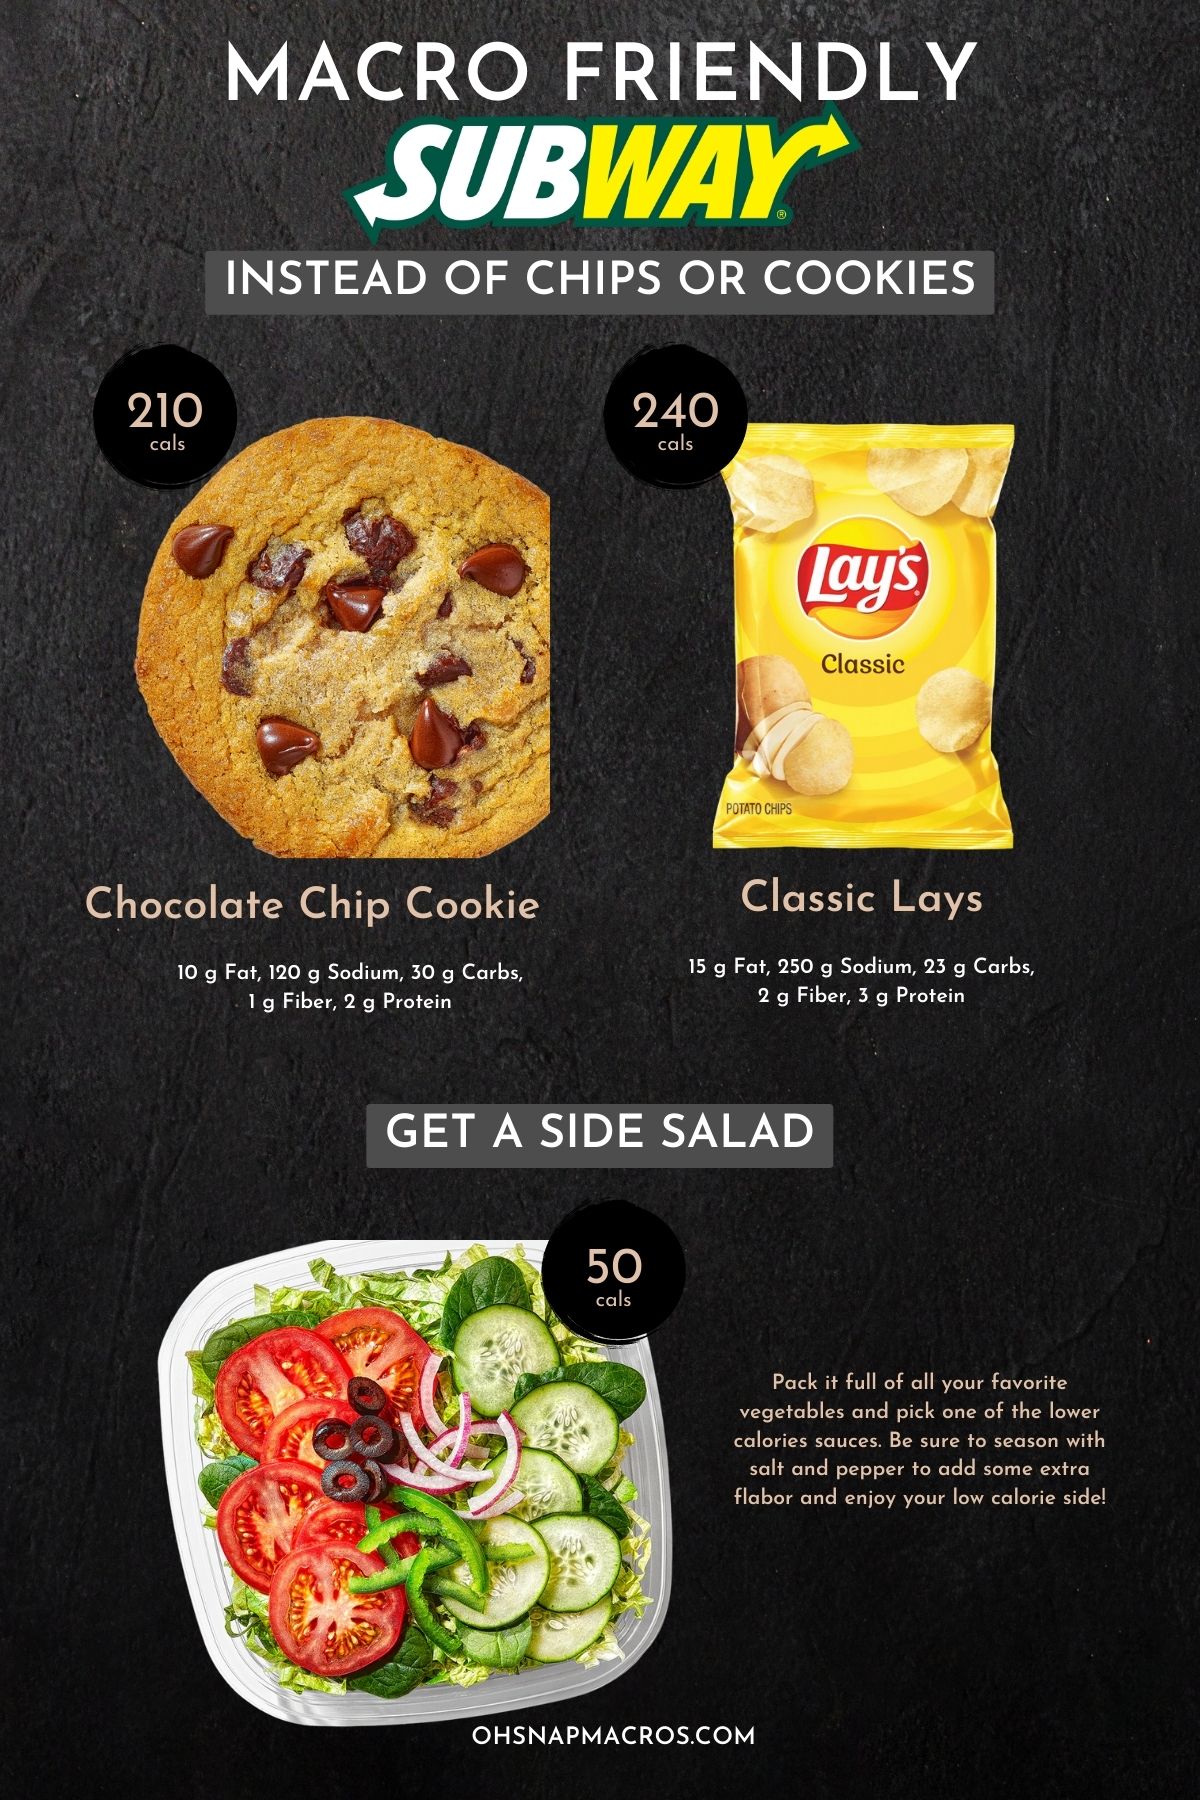 Graphic suggesting a side salad rather than a cookie or chips.